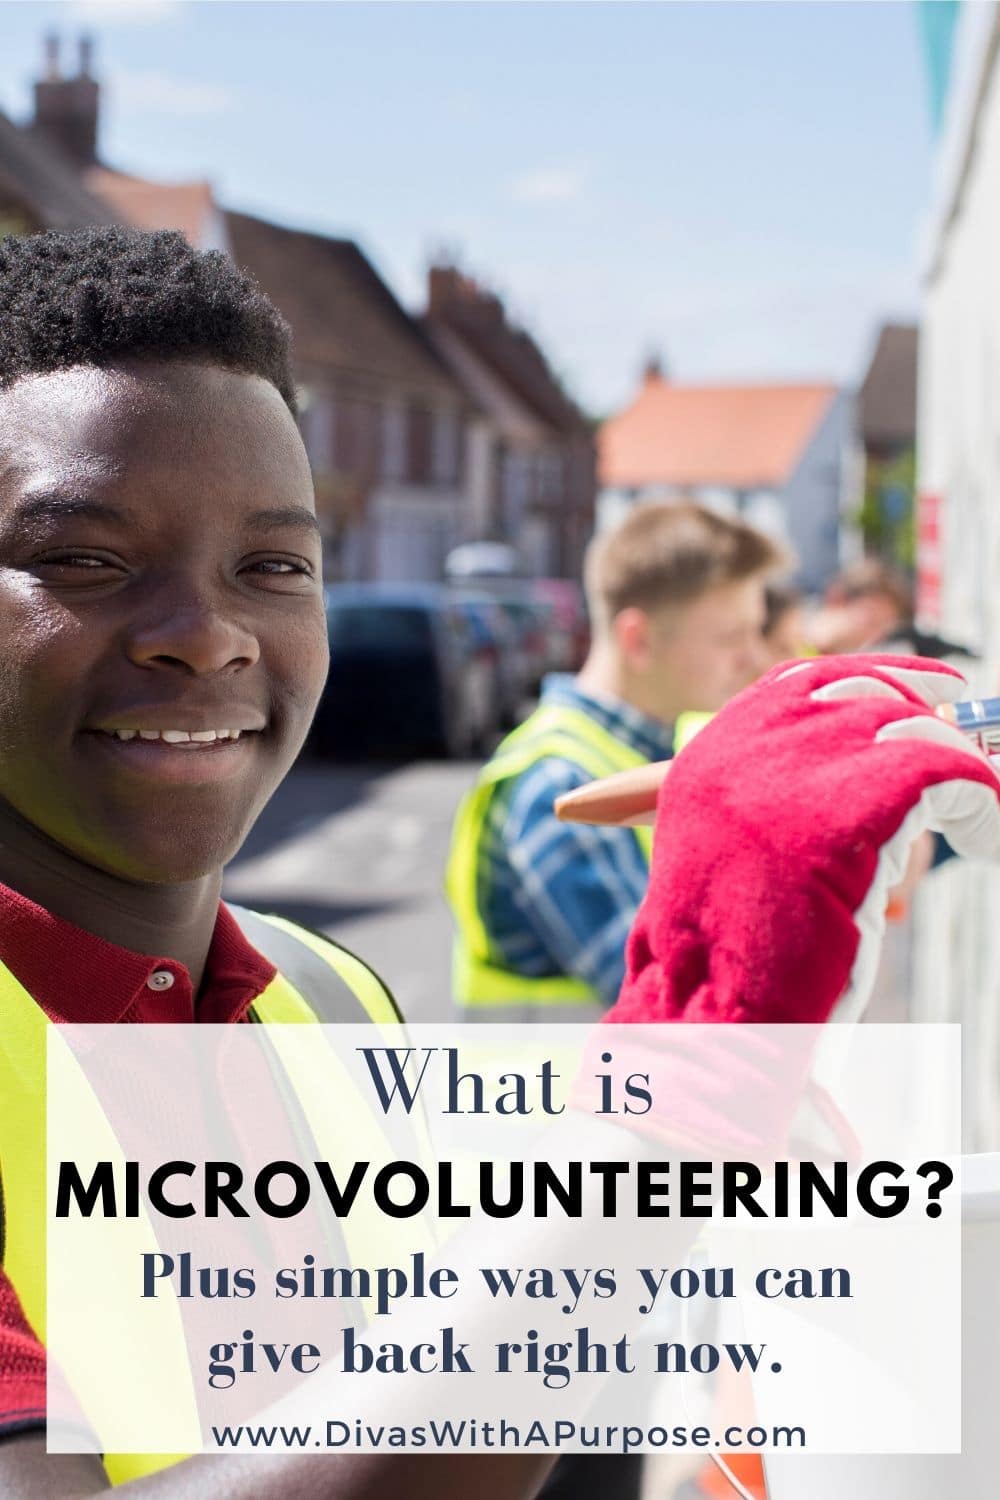 Simple ways to microvolunteer from anywhere